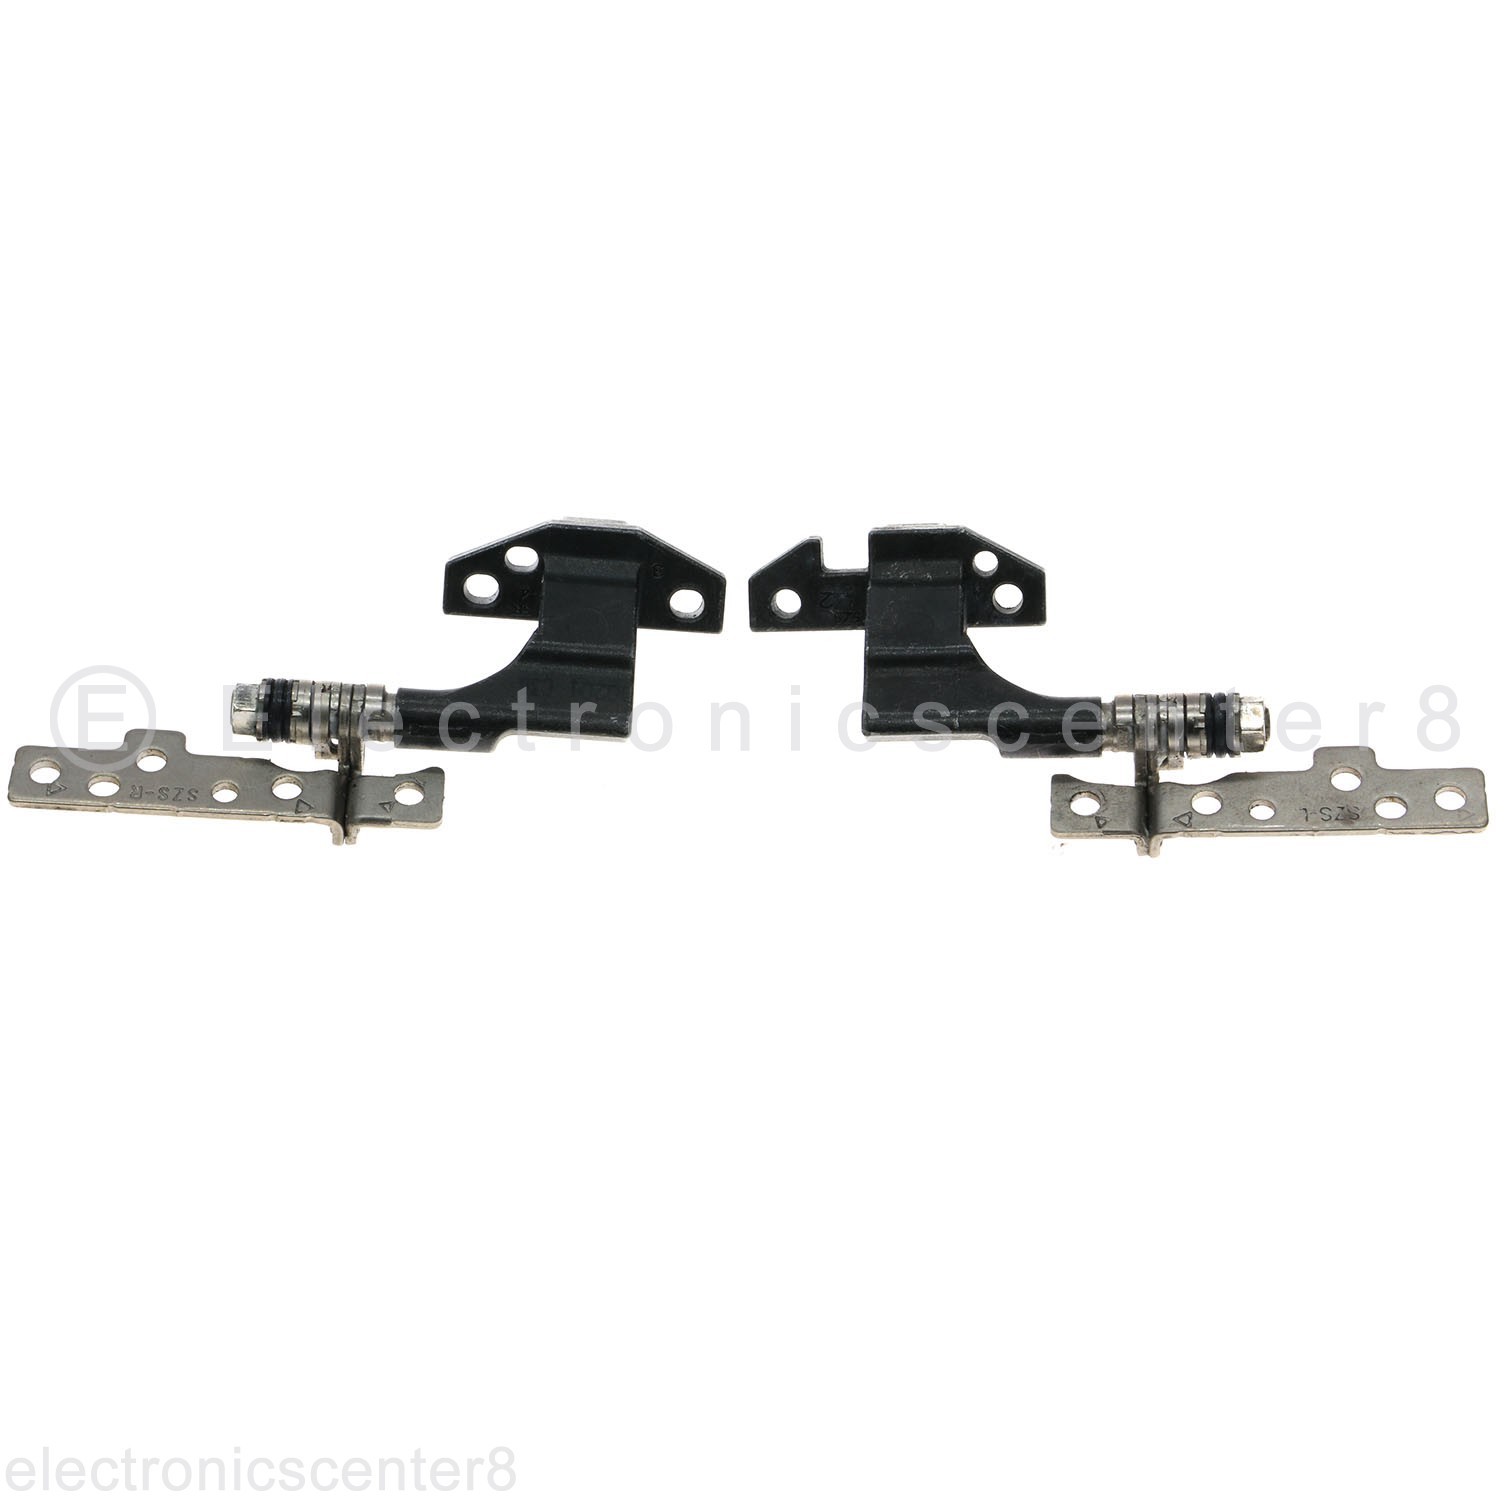 Lcd Screen Hinges Left Right Set For Dell Alienware M14x R1 M14x R2 Series Ebay